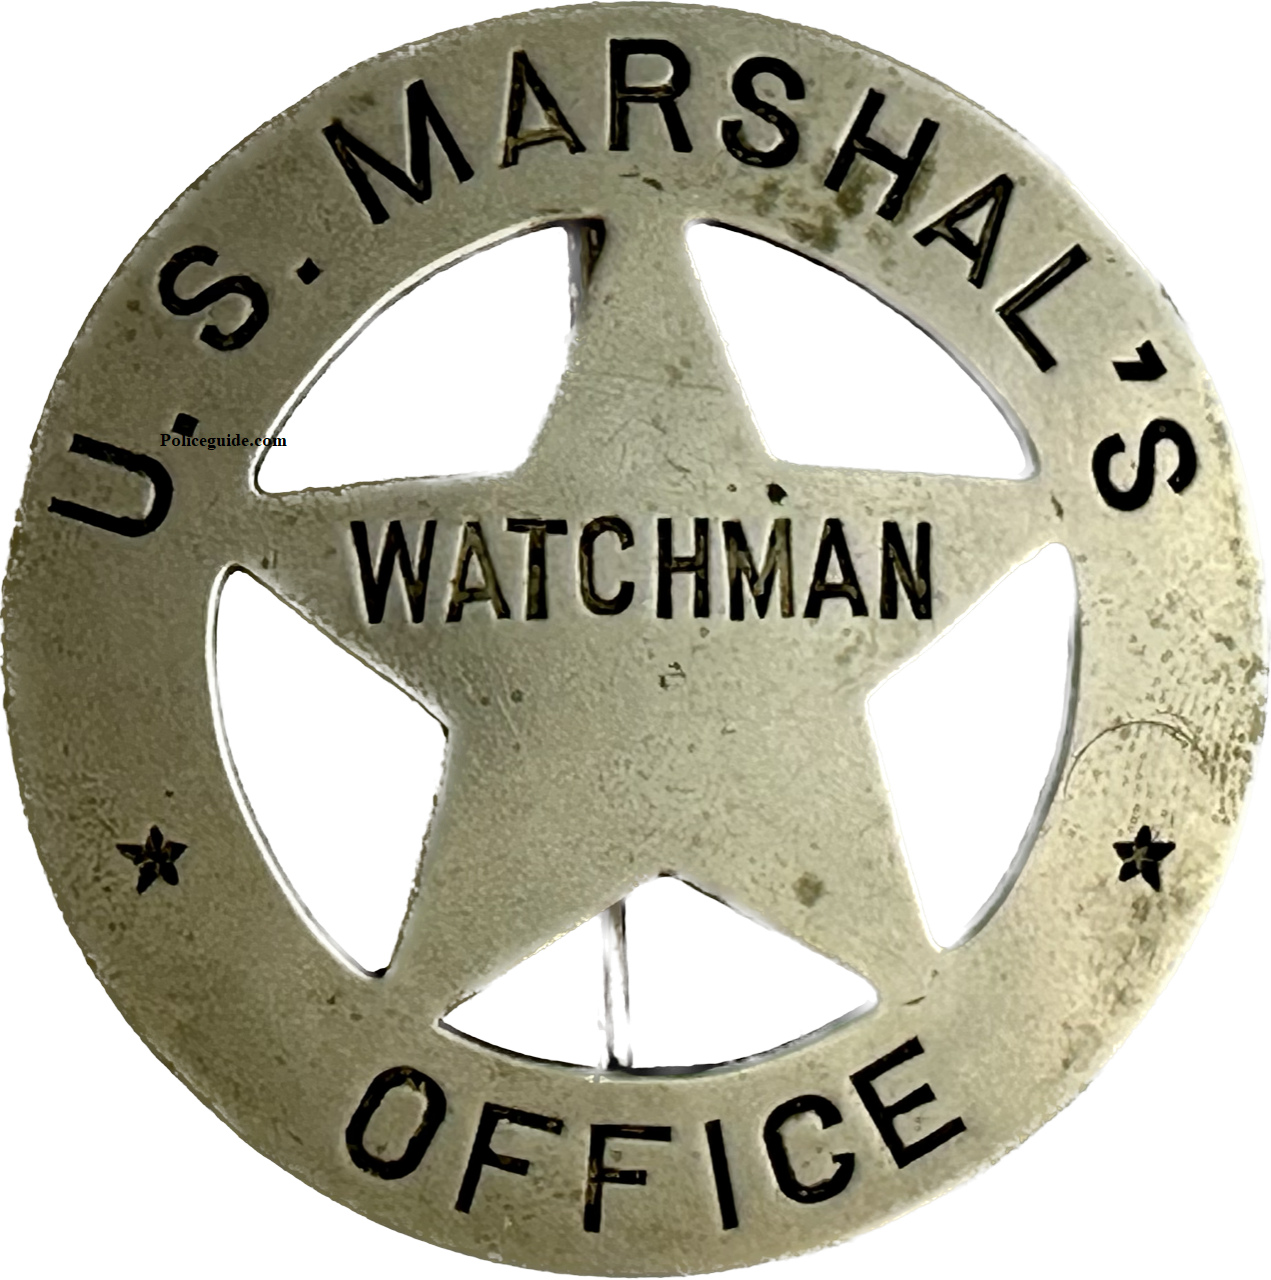 U. S. Marshal's Office Watchman circle cut out star.